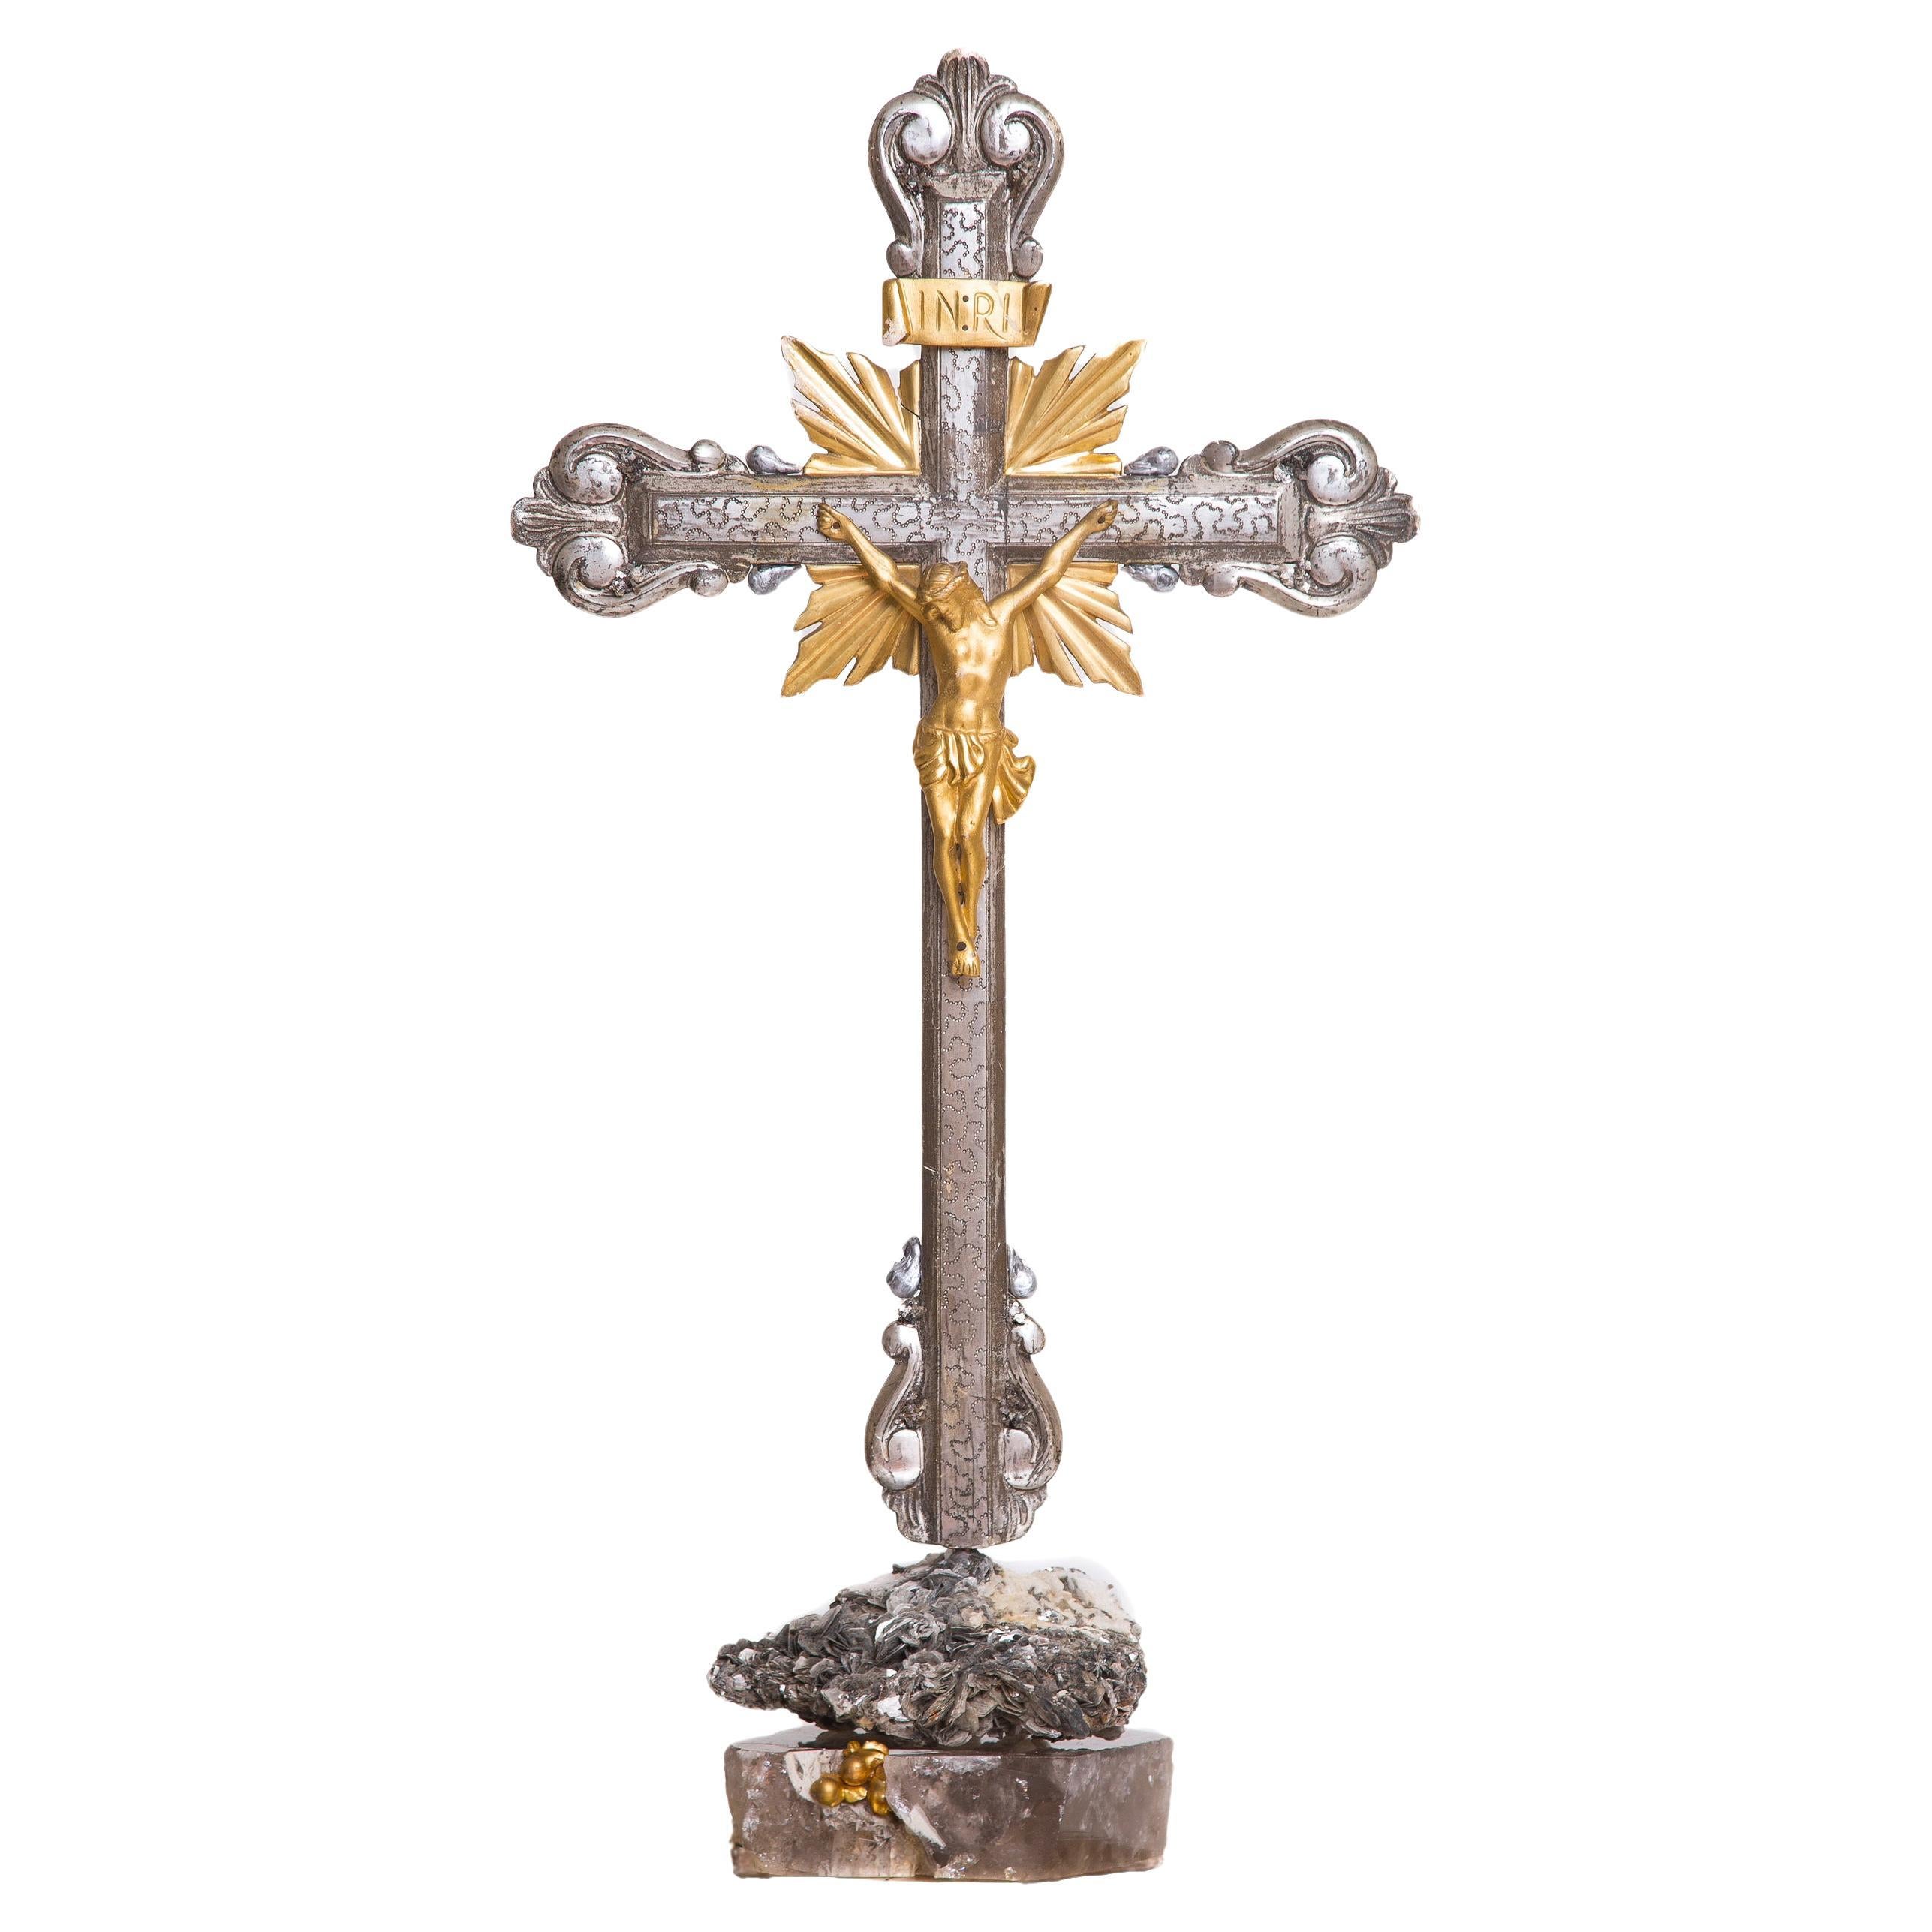 18th Century Italian Silver and Gold Crucifix with Mica and Calcite Crystal